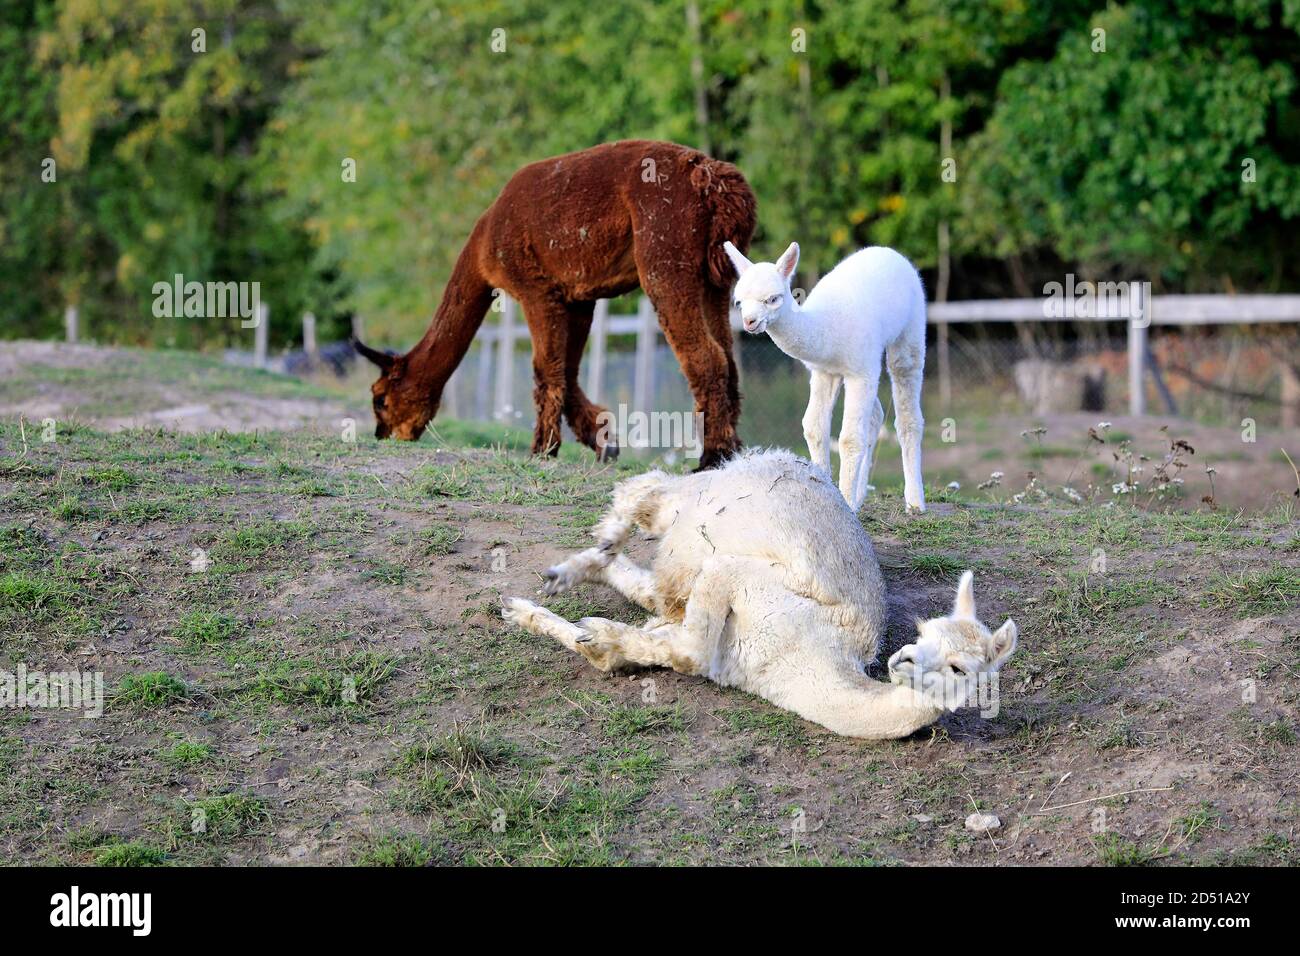 White Alpaca, Vicugna pacos, is rolling over on ground in a fenced pasture while other alpacas are grazing. Stock Photo